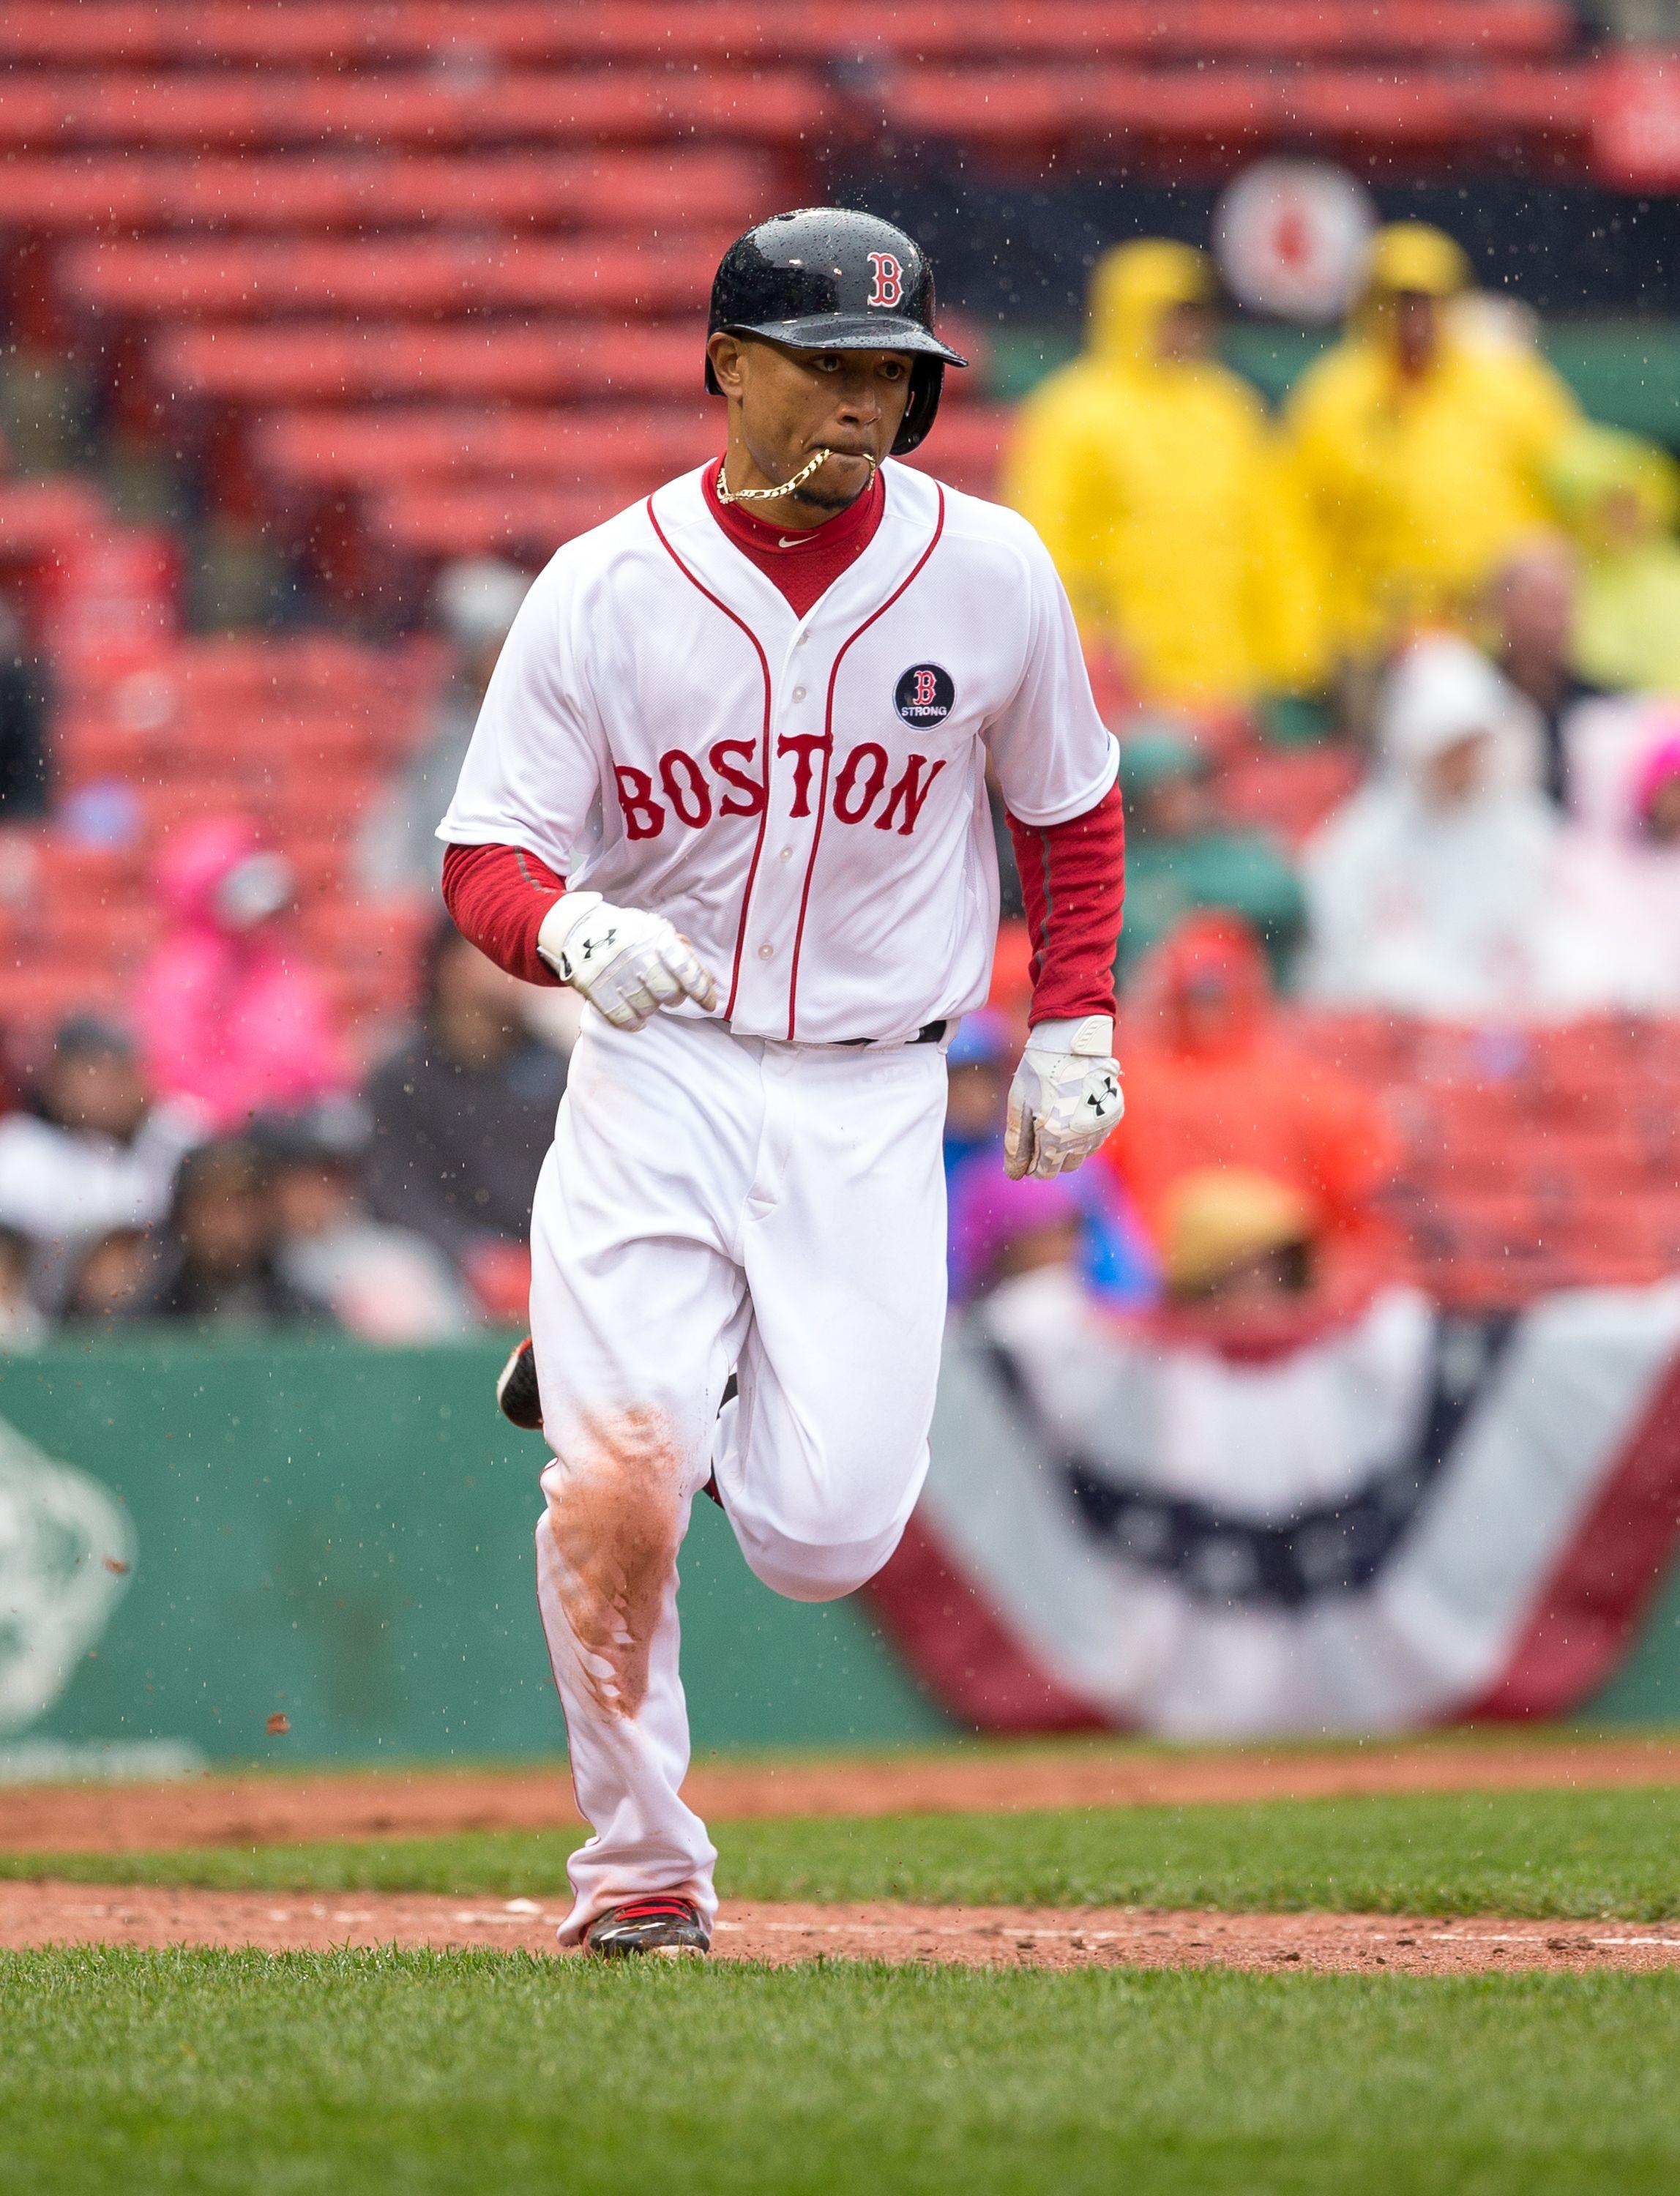 The Boston Red Sox Cannot Justify Trading Mookie Betts The Ringer   xn90absbknhbvgexnp1ai443